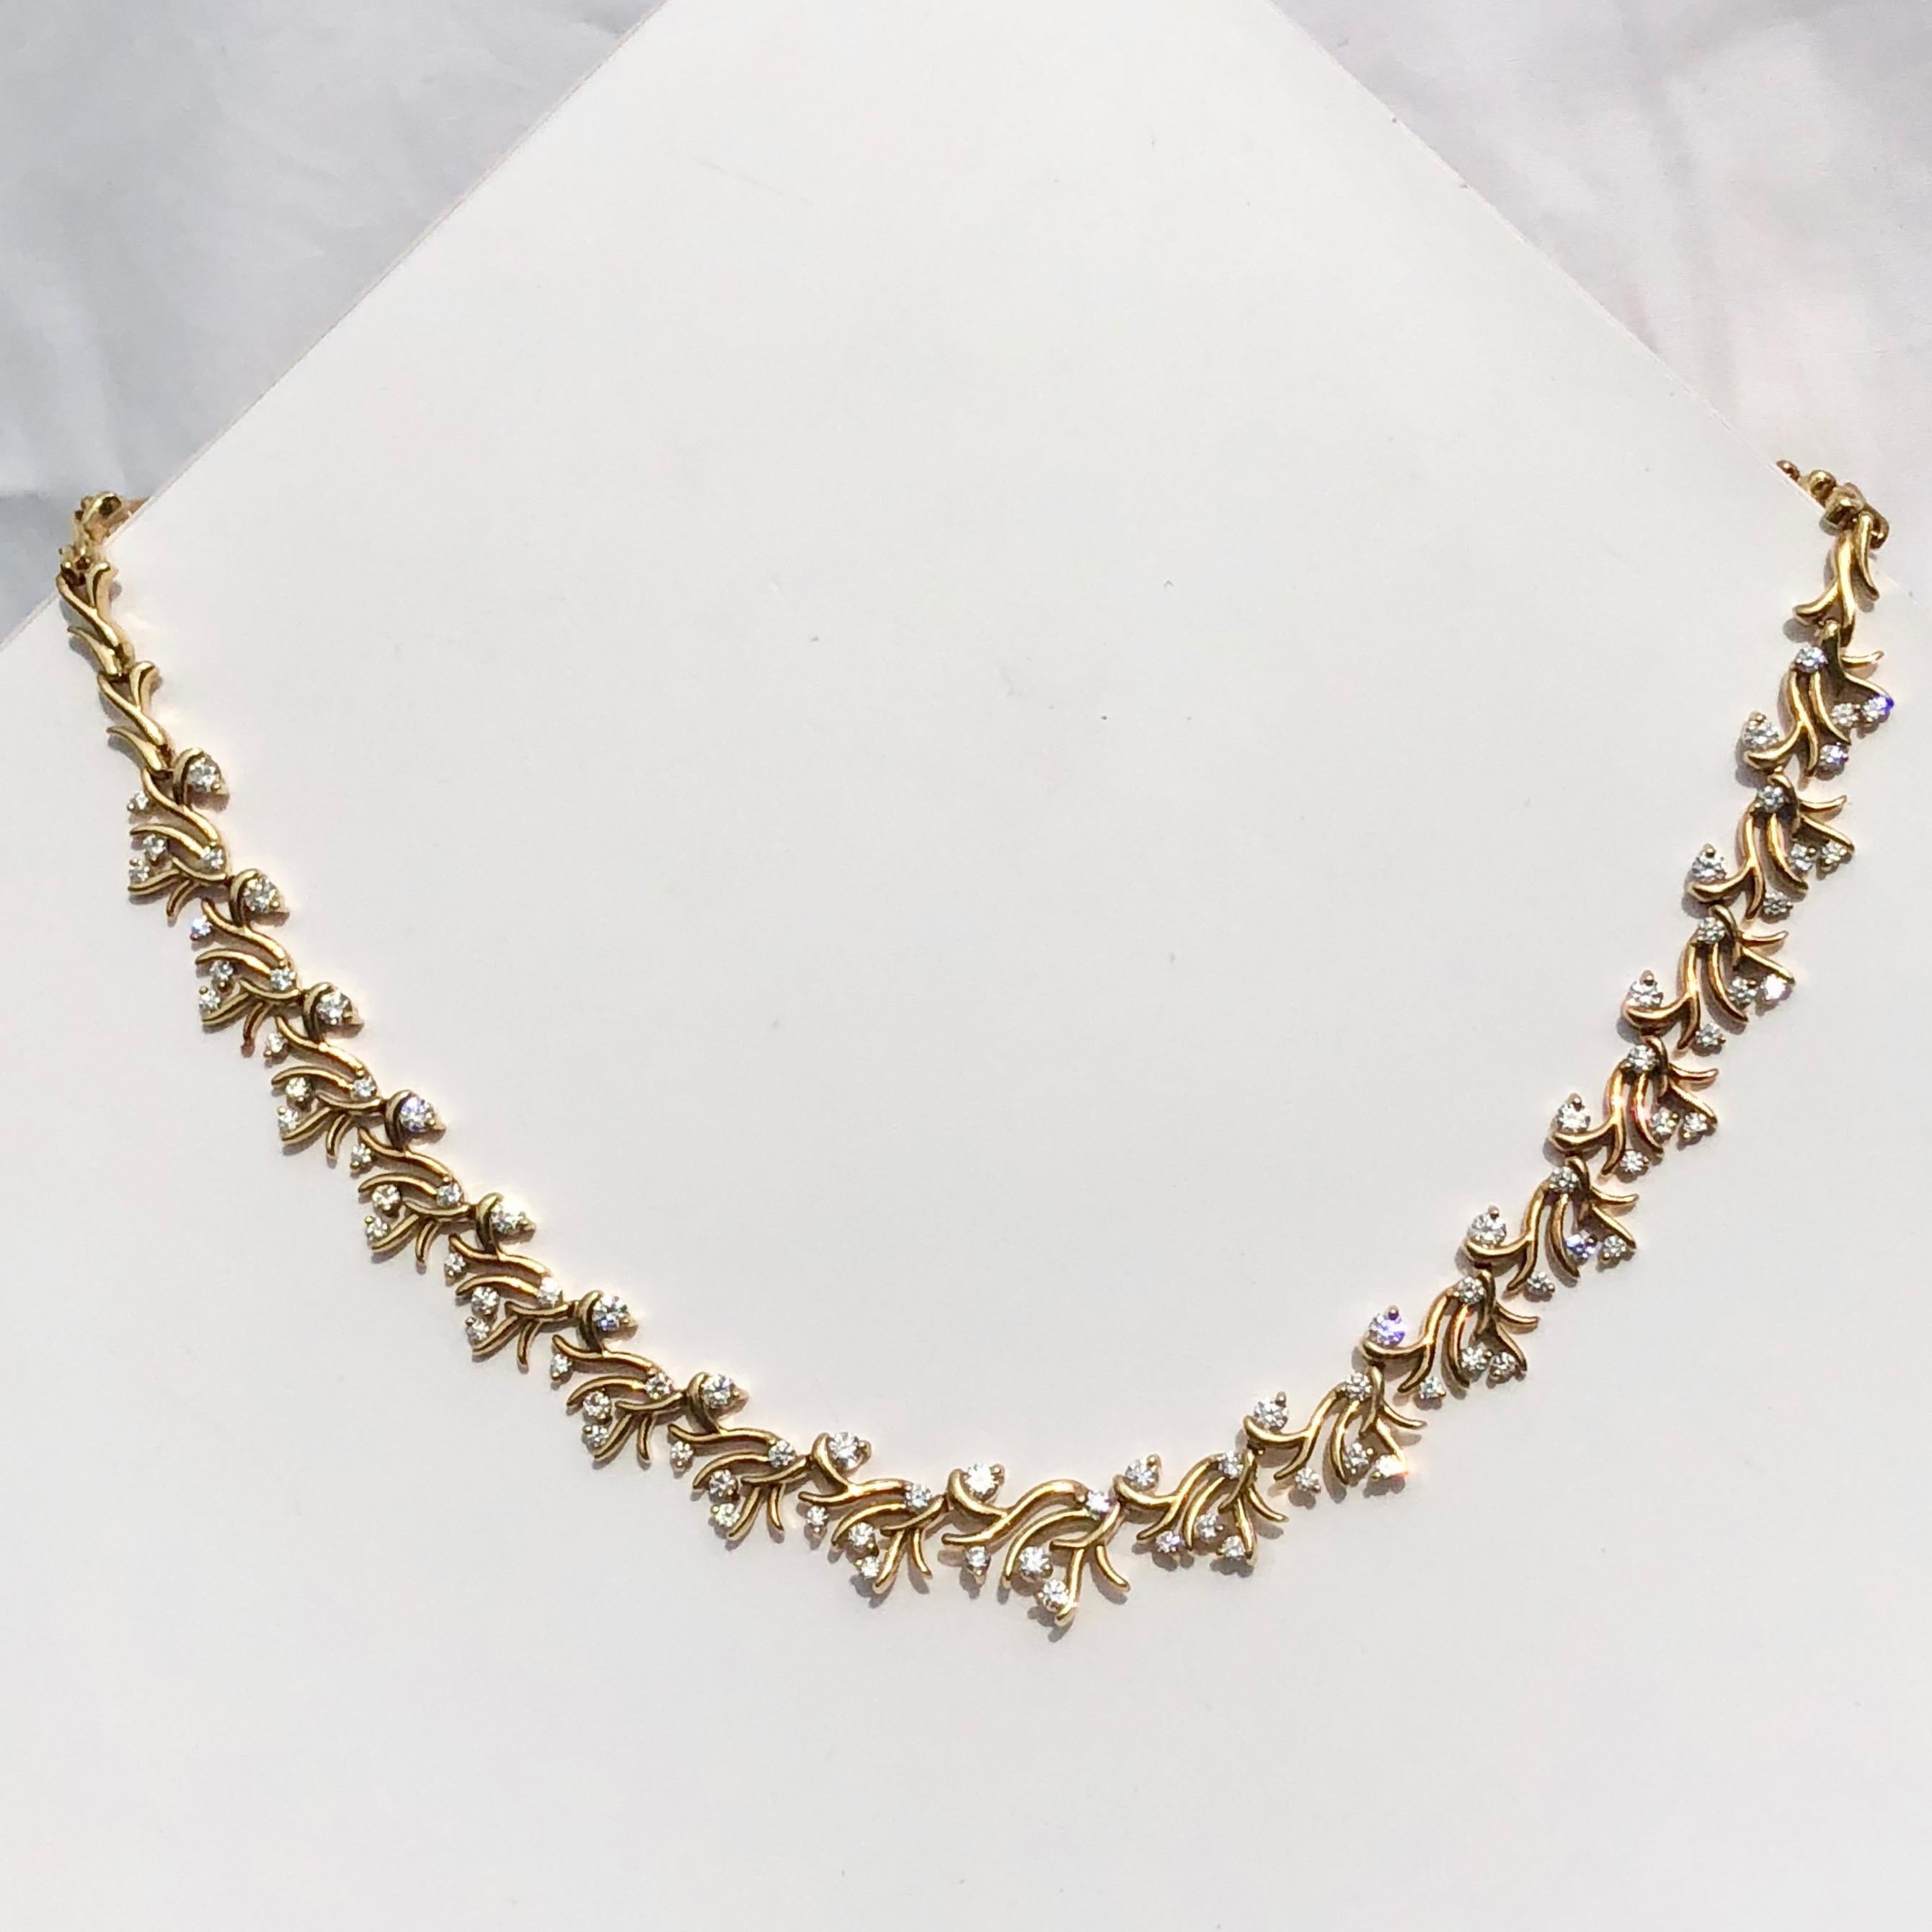 In 18k Yellow Gold and Diamonds 
This Yellow Gold Collar By The Highly Awarded Designer José Hess
The Gently Scrolling Artfully Sculptured Folate Yellow Gold Intersected With Exceptional Quality White Round Brilliant Cut Diamonds.

Total Diamond